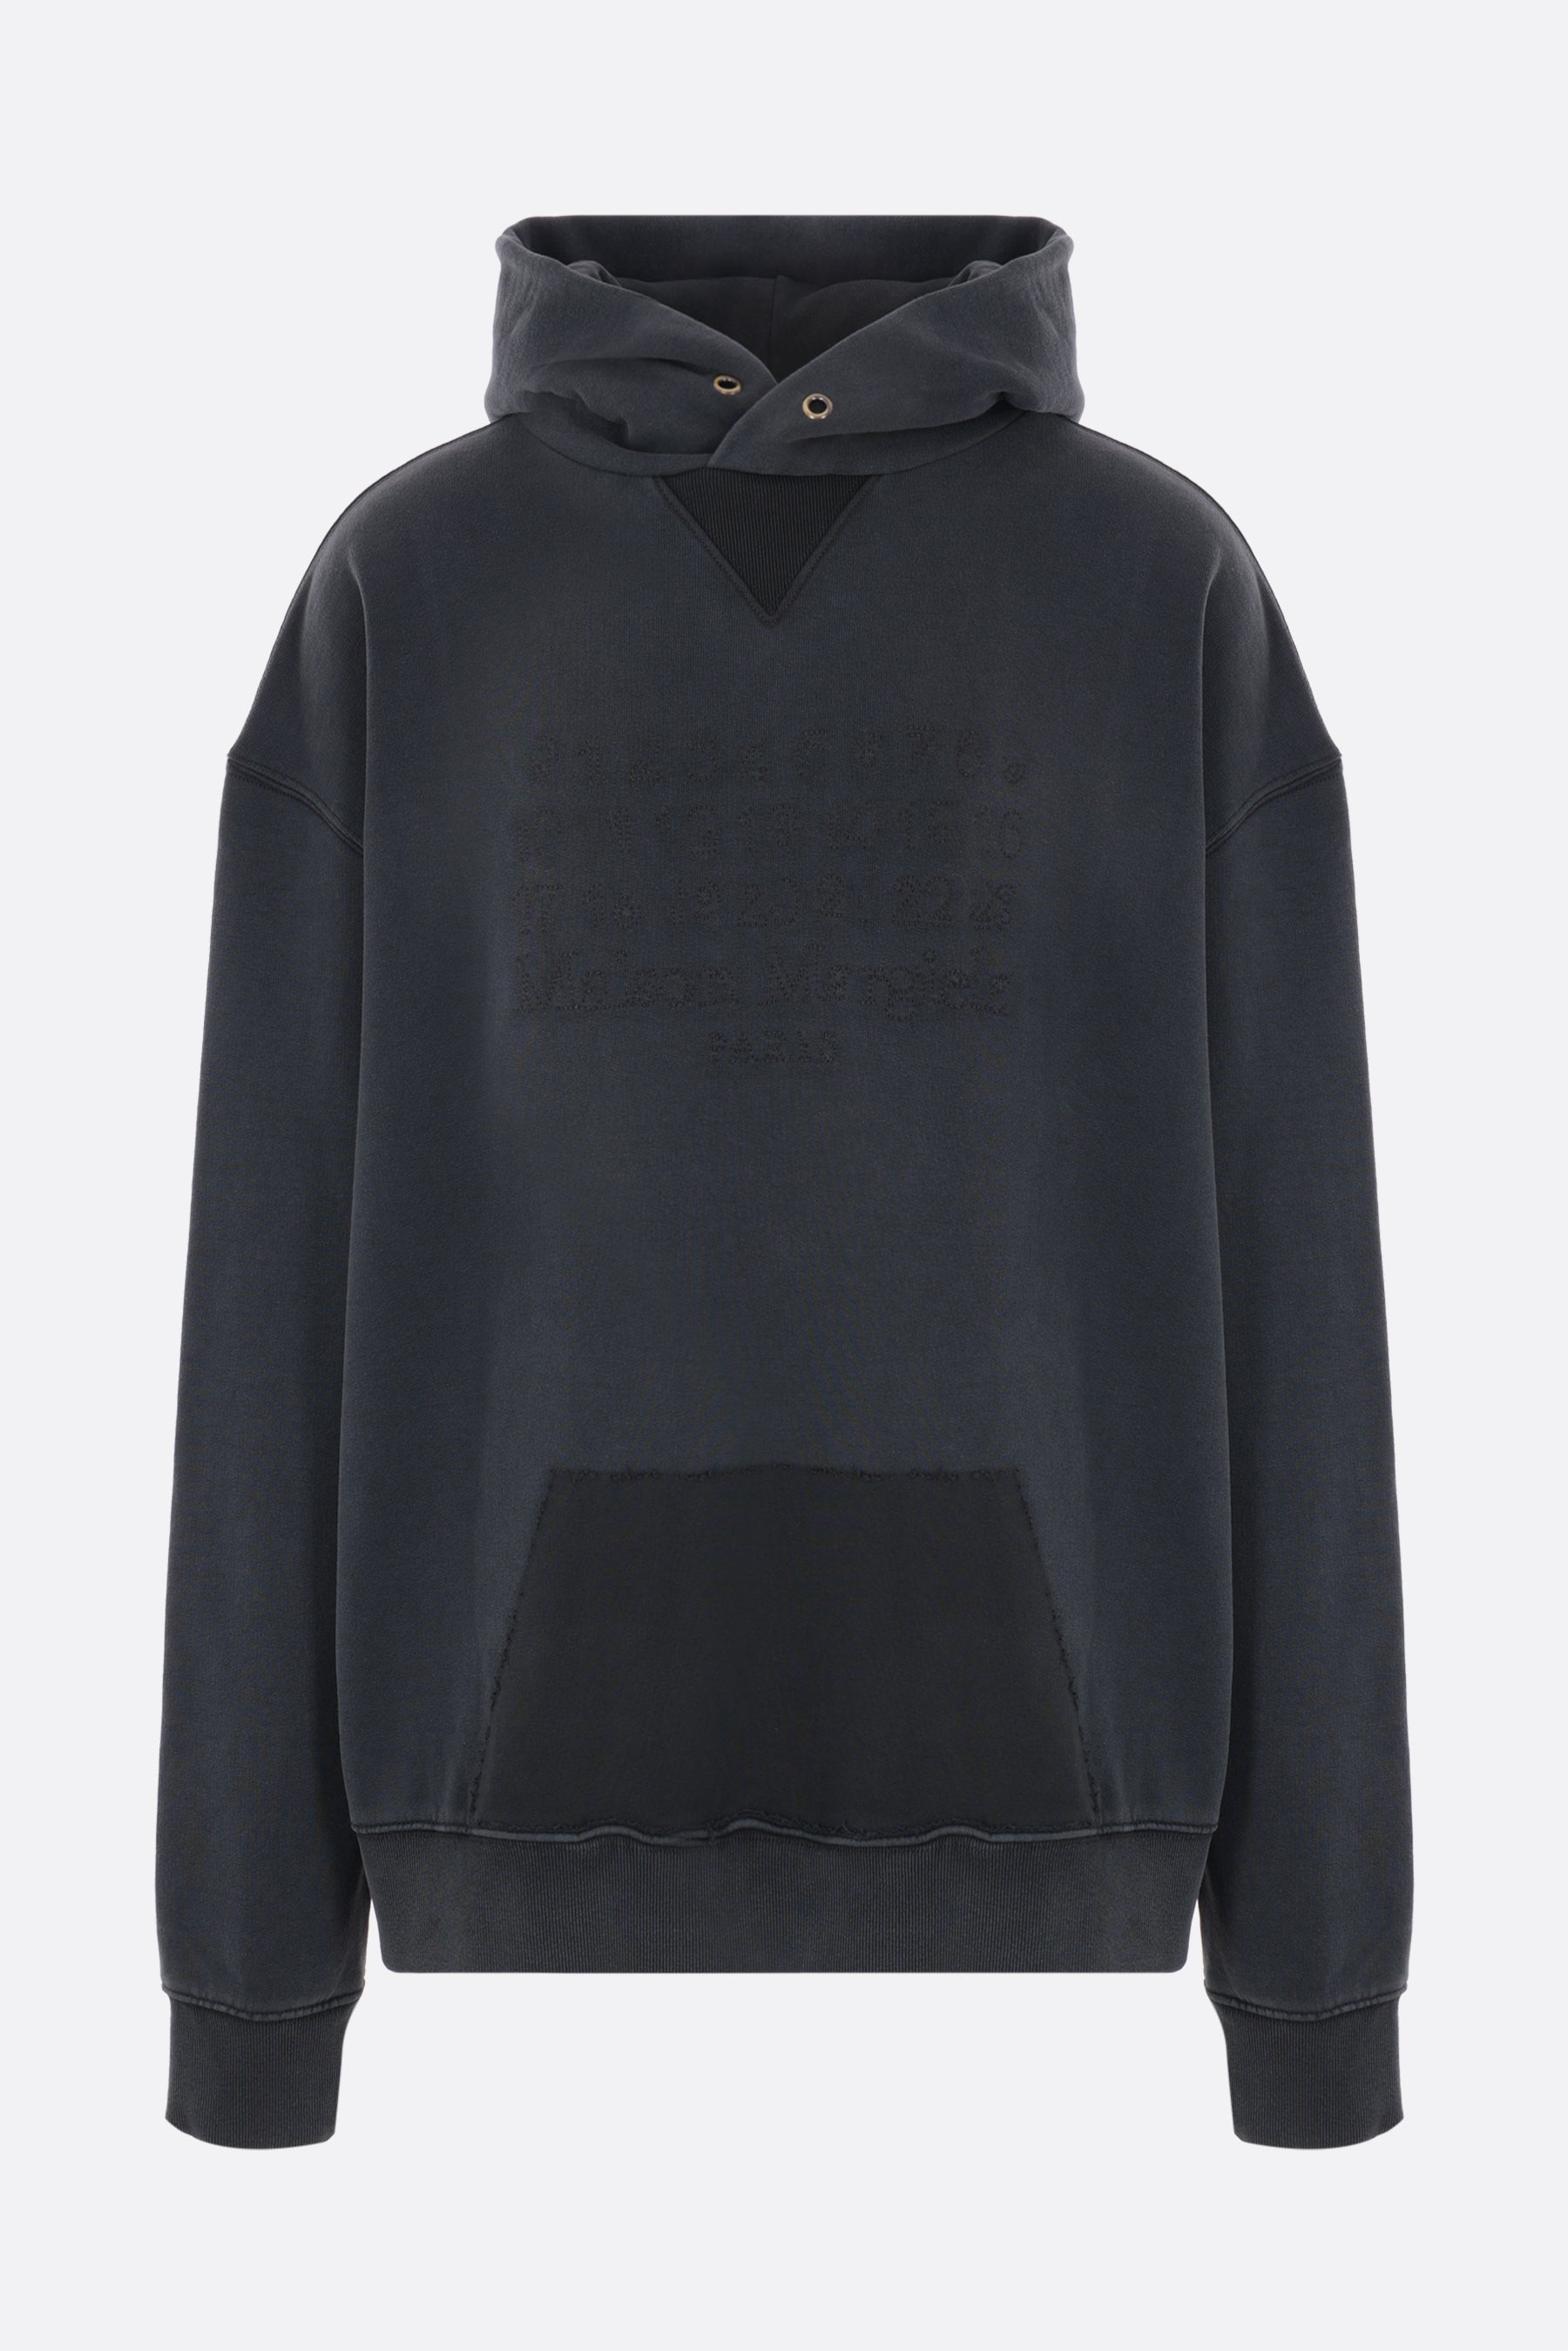 jersey oversized hoodie with numeric logo stitches